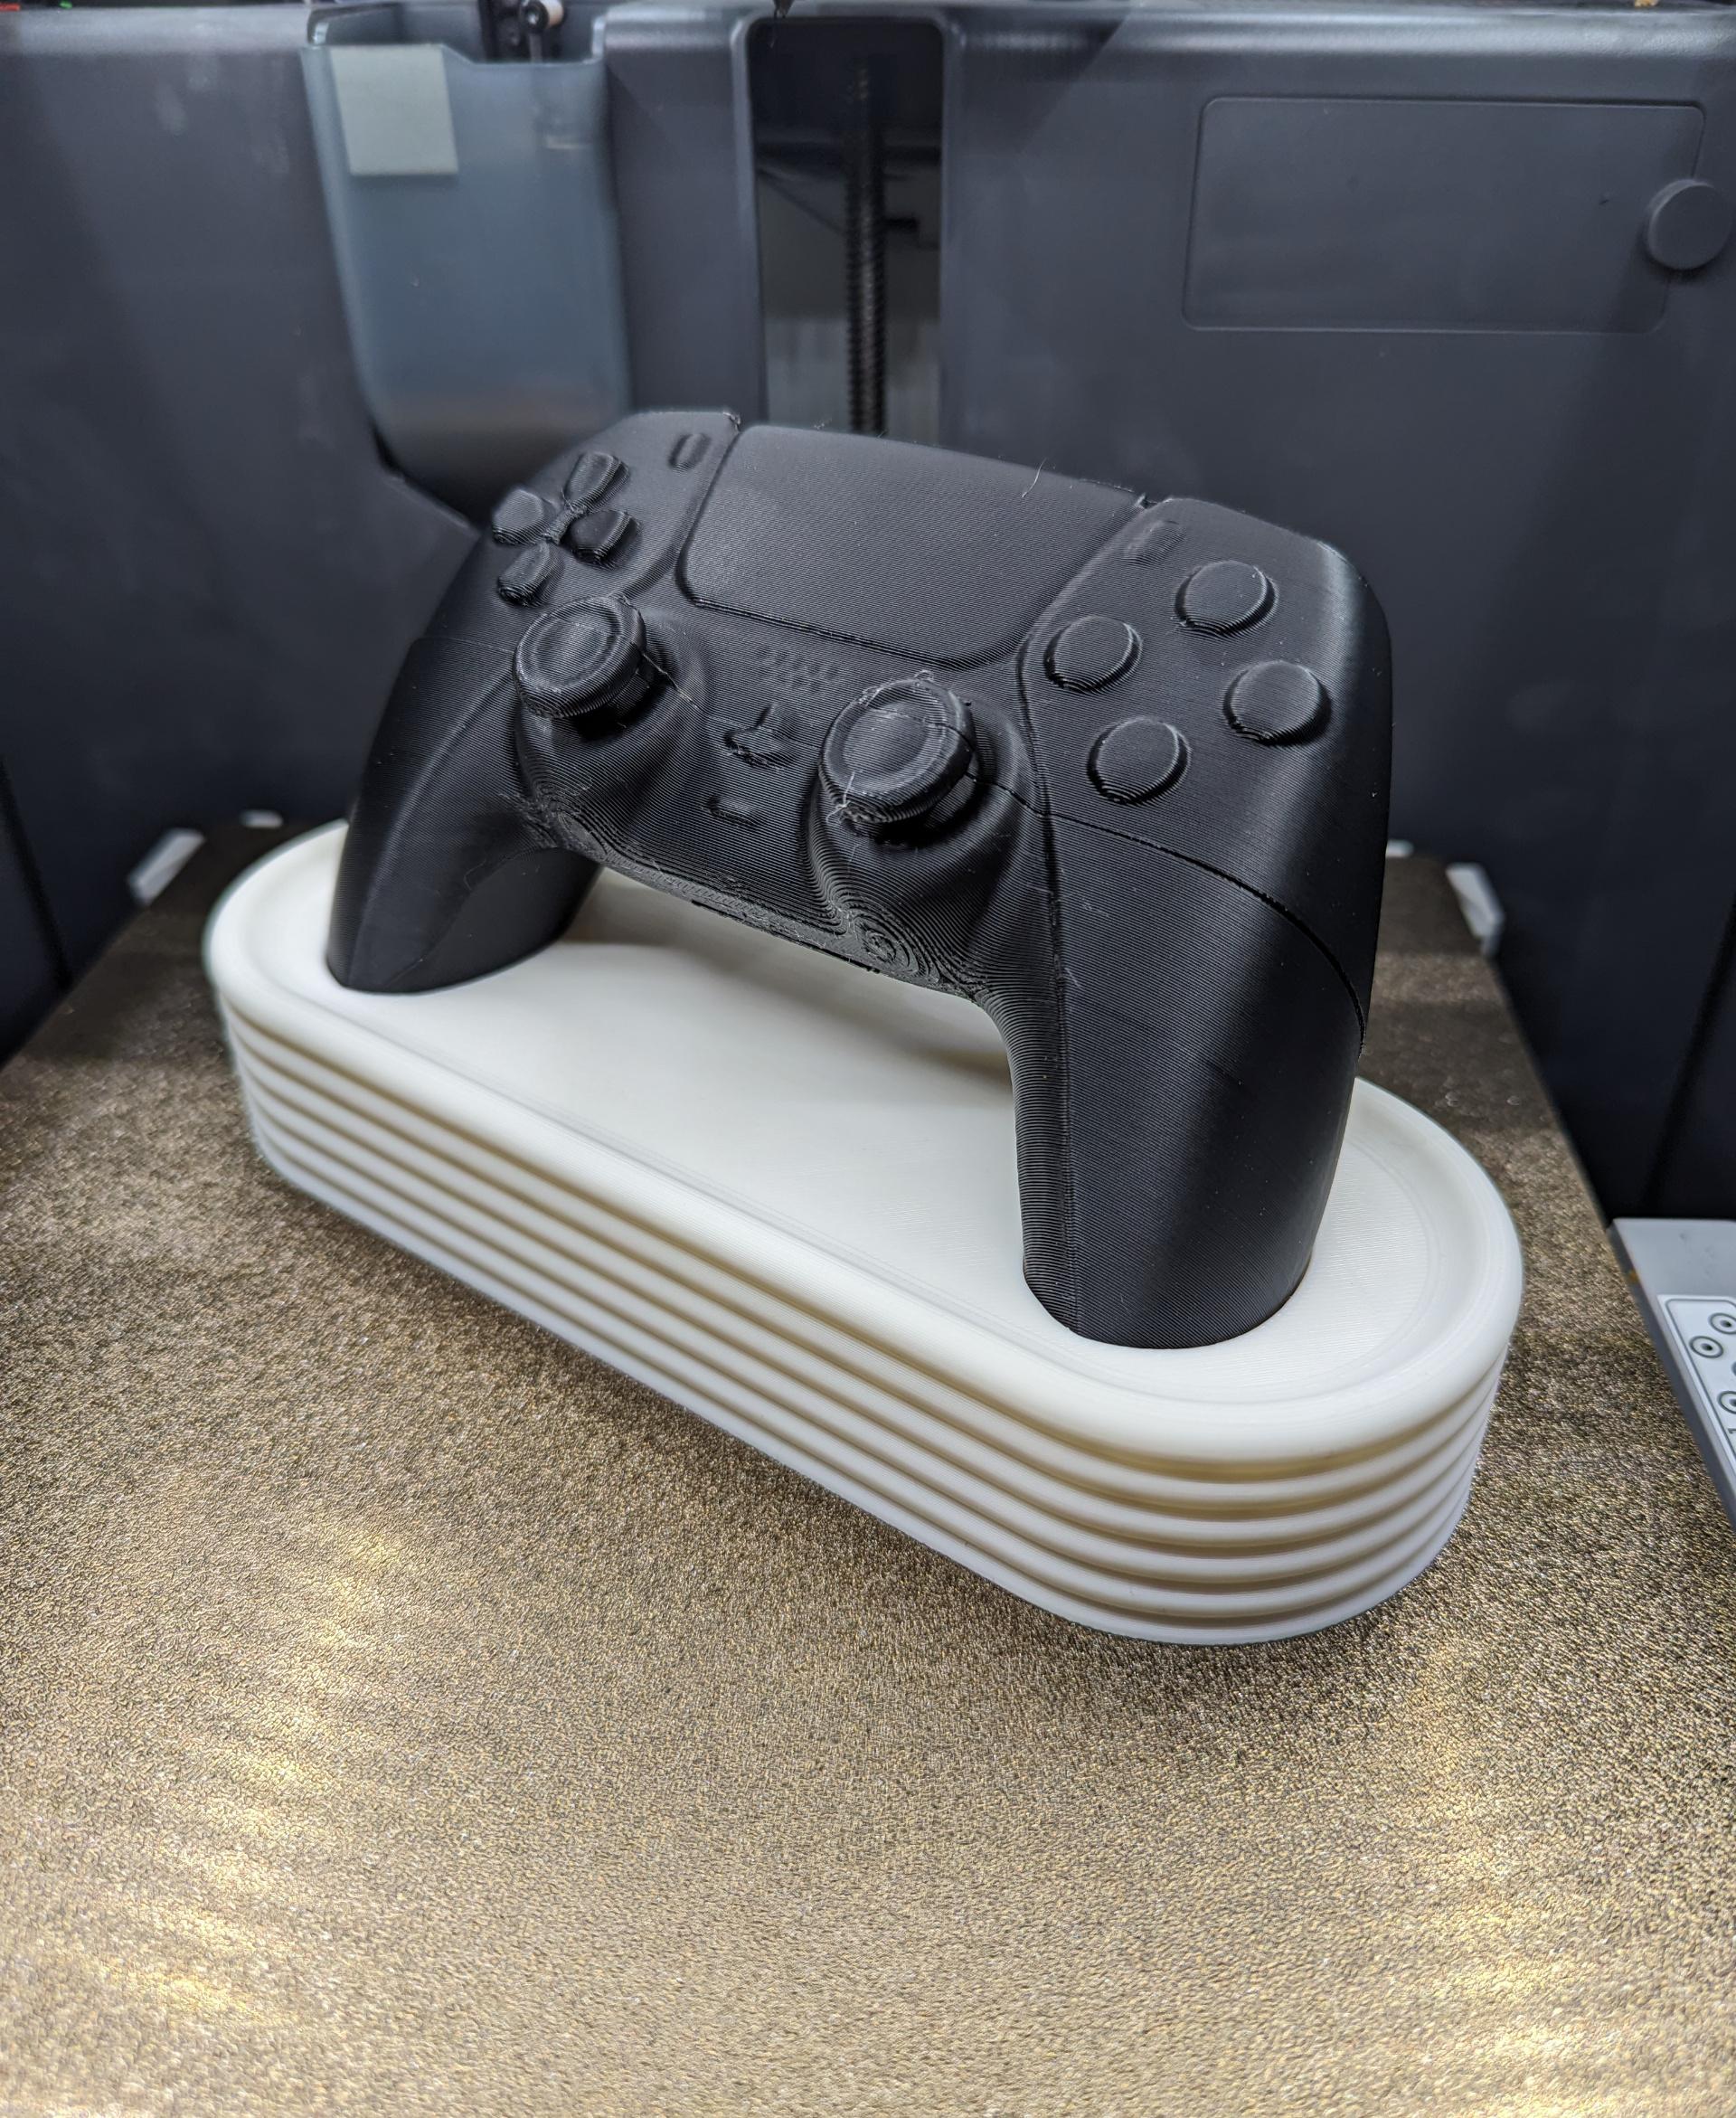 6 Ring Phantom Controller Stand | A Modern Minimalistic Gaming Stand - Printed great!  Time and material usage was spot on.

I don't own a PS5 to test with, so I had to print the controller as well! - 3d model